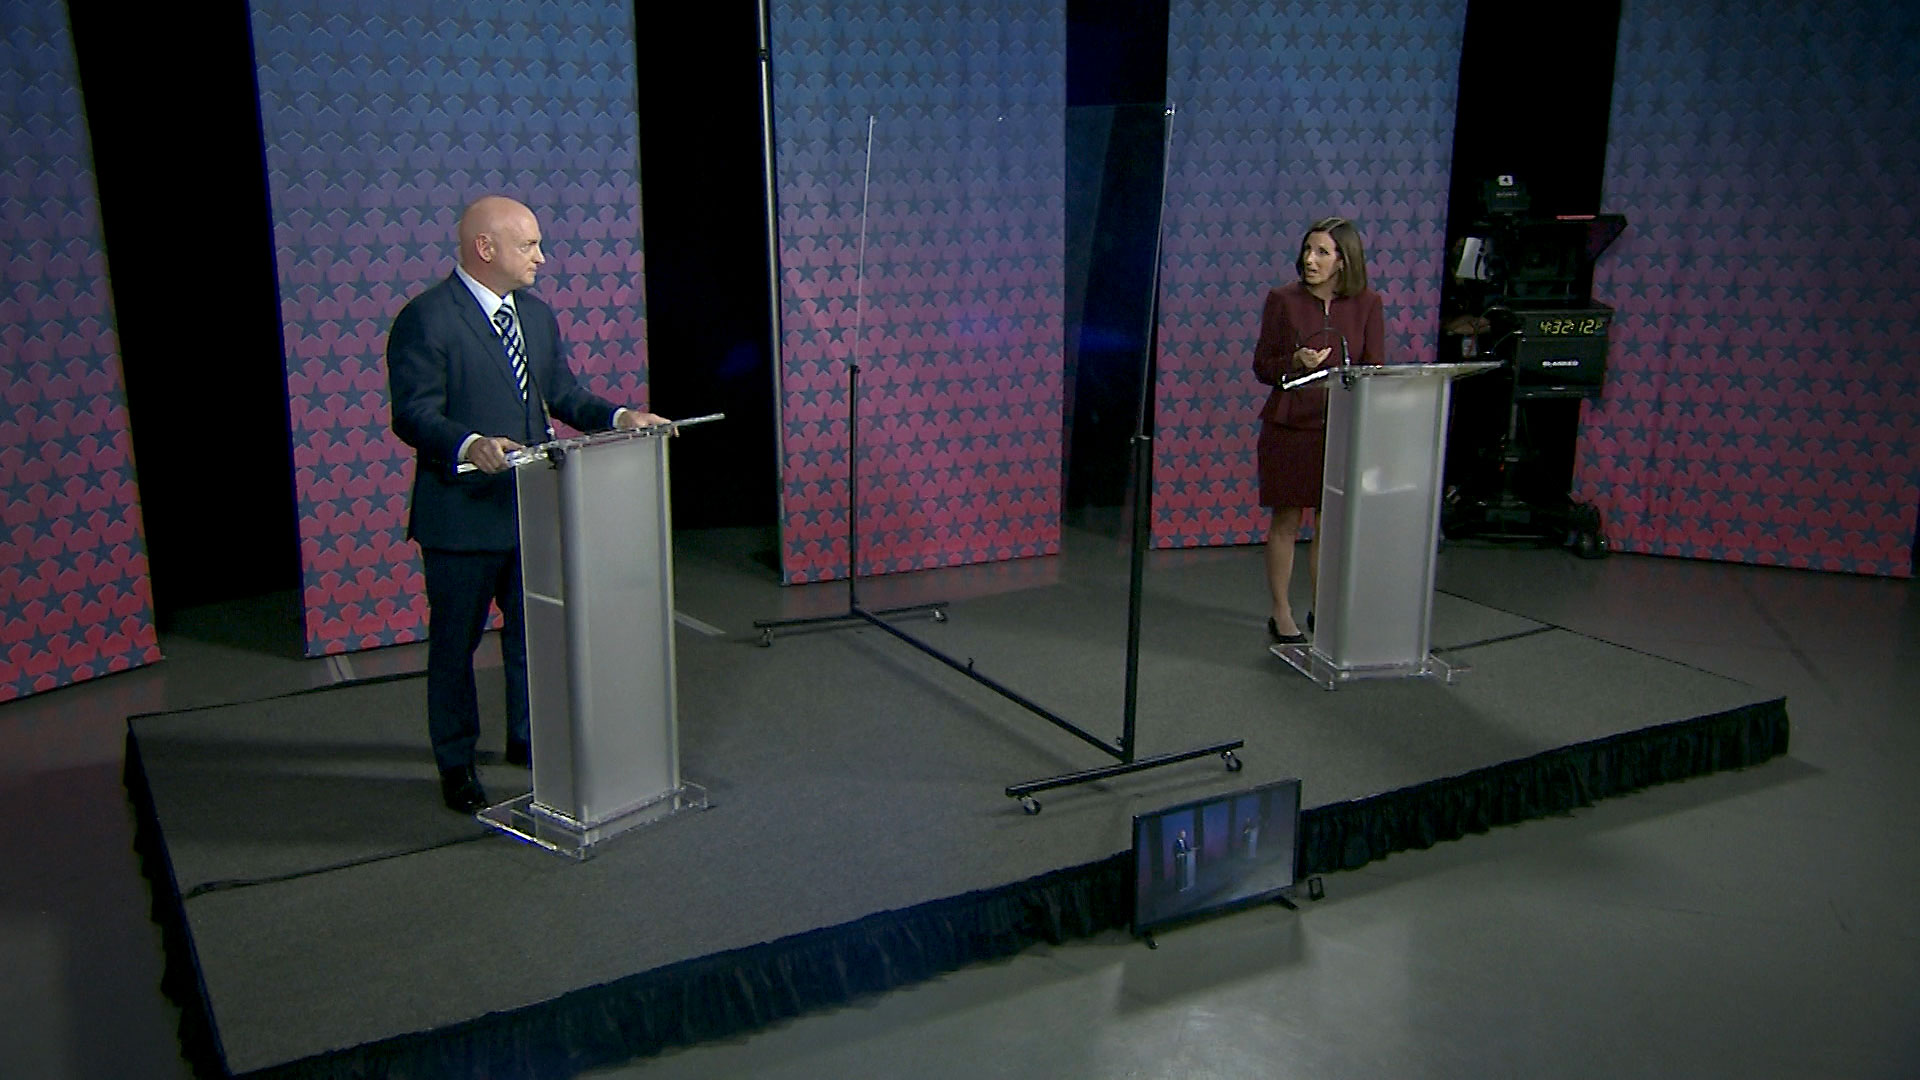 An image from the broadcast of the U.S. Senate debate between Sen. Martha McSally (R) and Mark Kelly (D) at Arizona PBS on Oct. 6, 2020. 